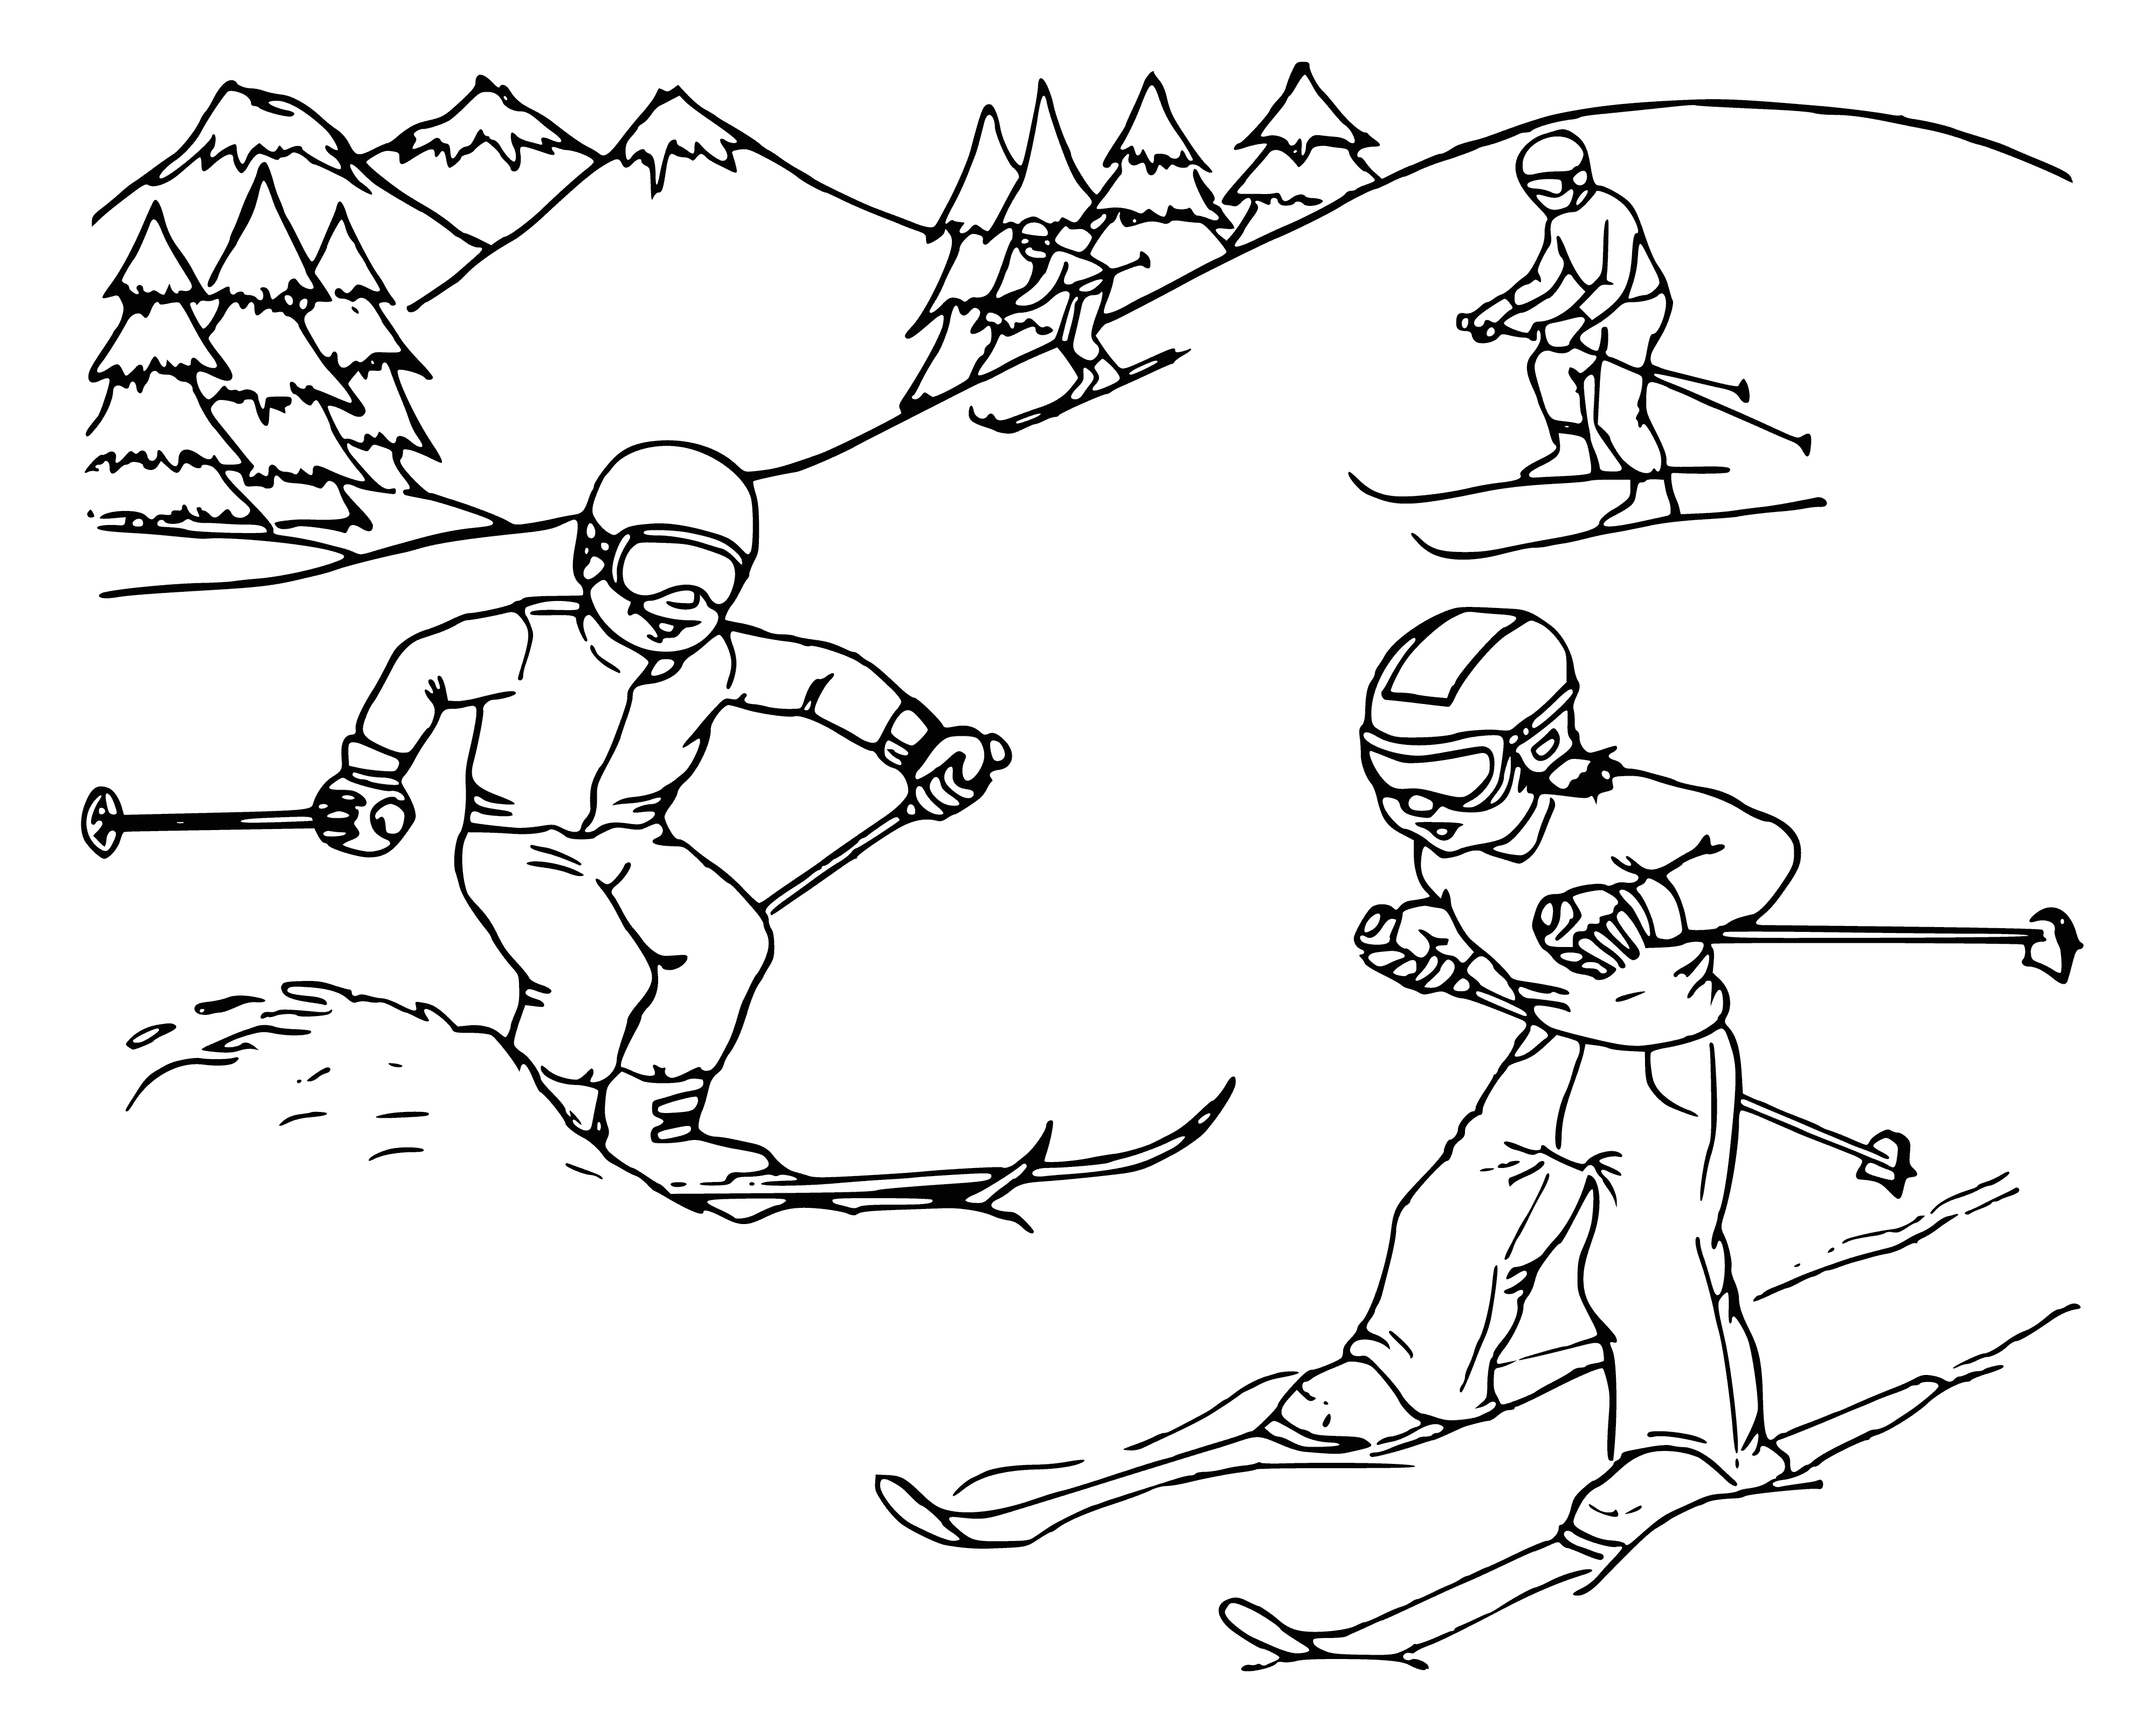 coloring page: People skiing down a hill in a blue sky with shining sun and sparkling snow.